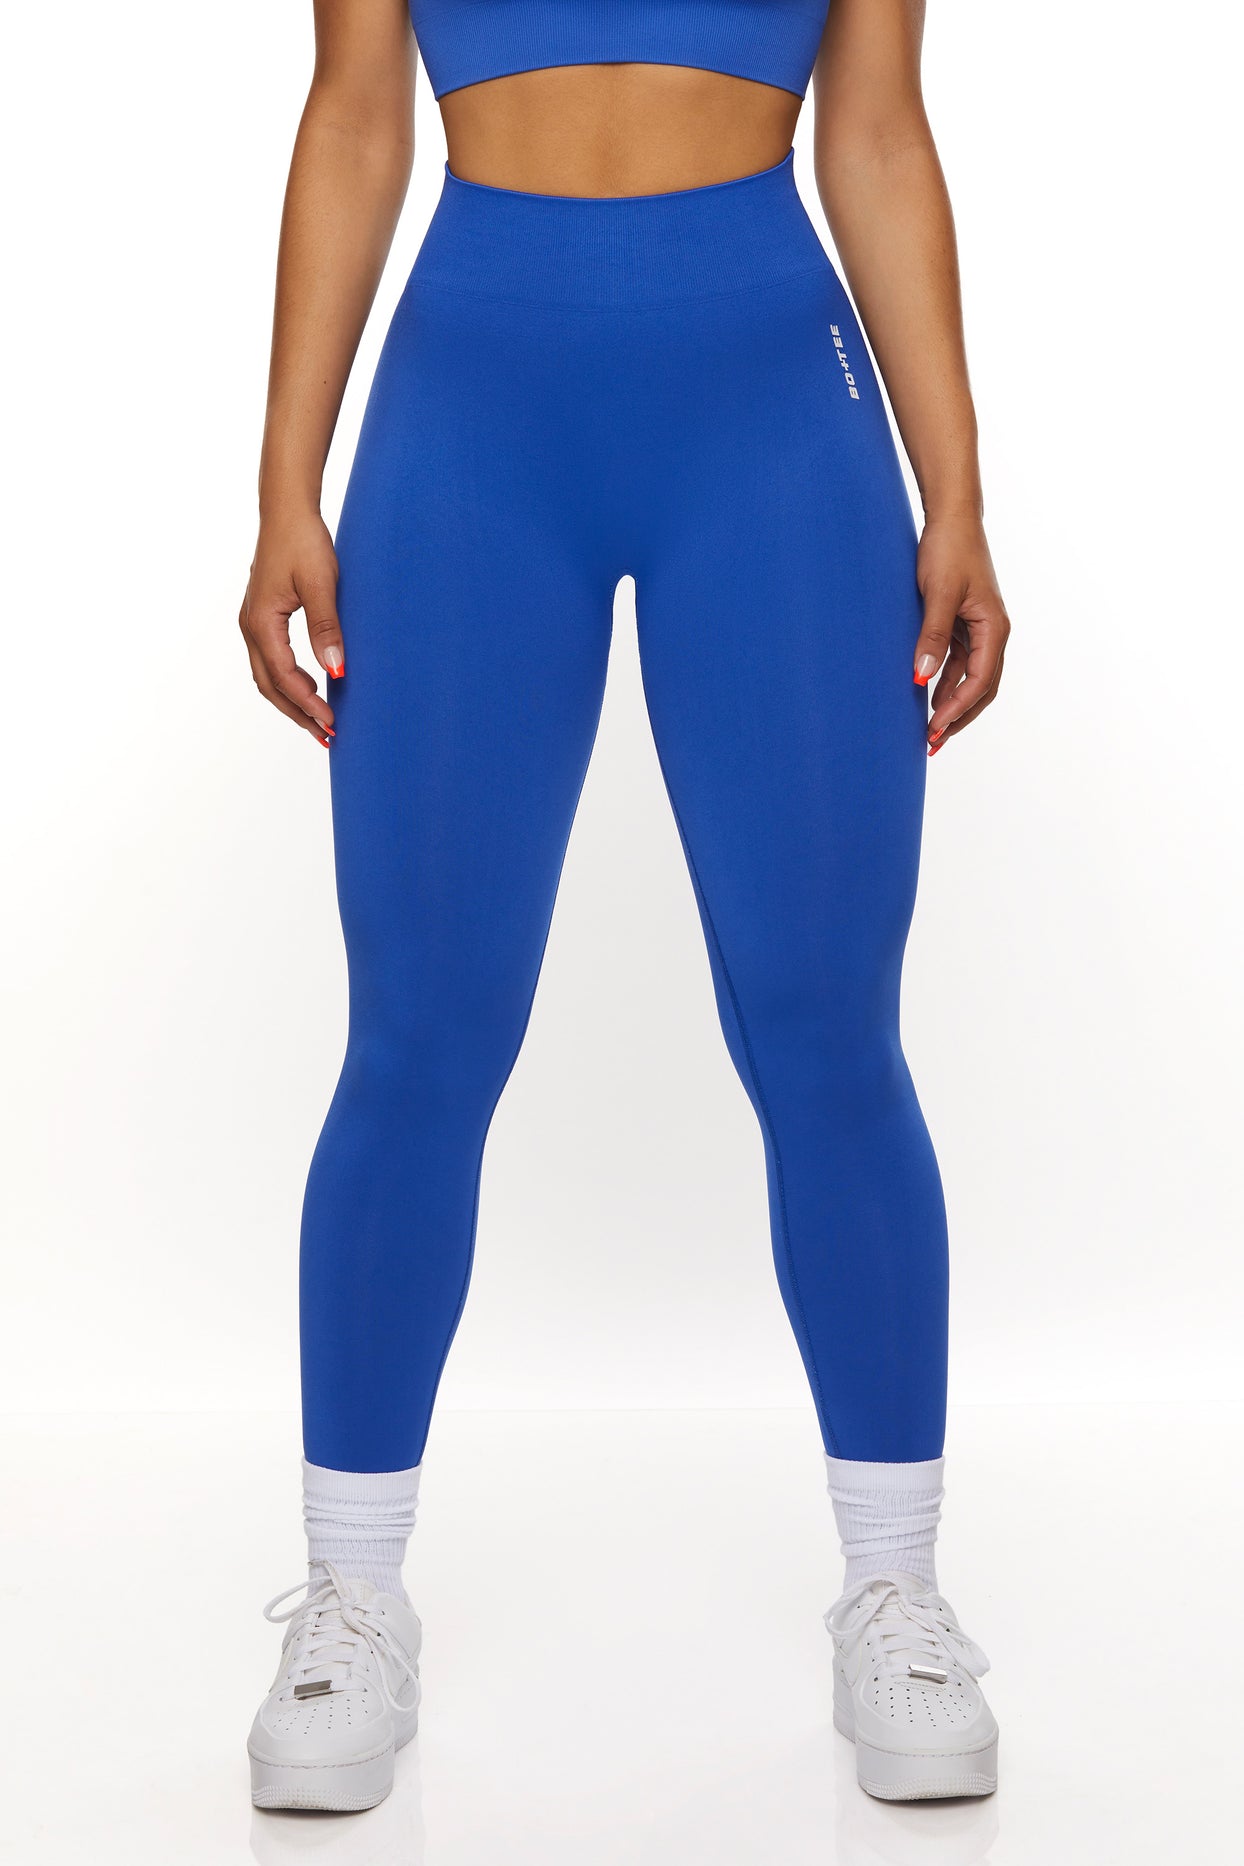 Highwaist Seamless Leggings - Swiss shipping, fast delivery